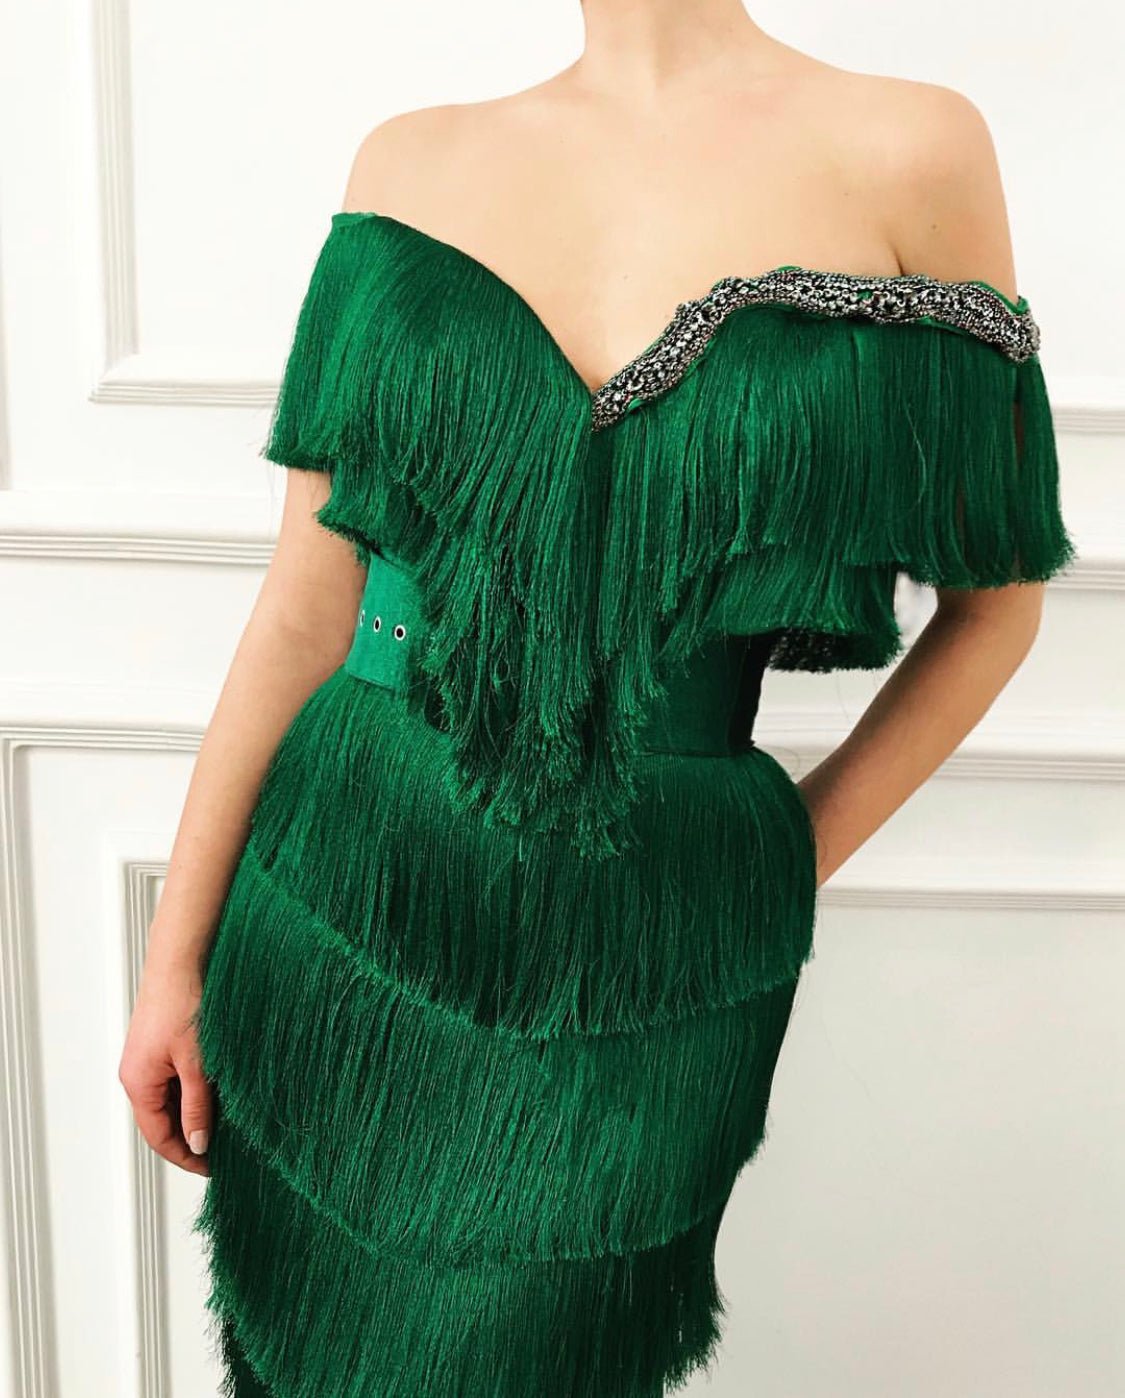 Green fringe mermaid dress with embroidery, off the shoulder sleeves and belt